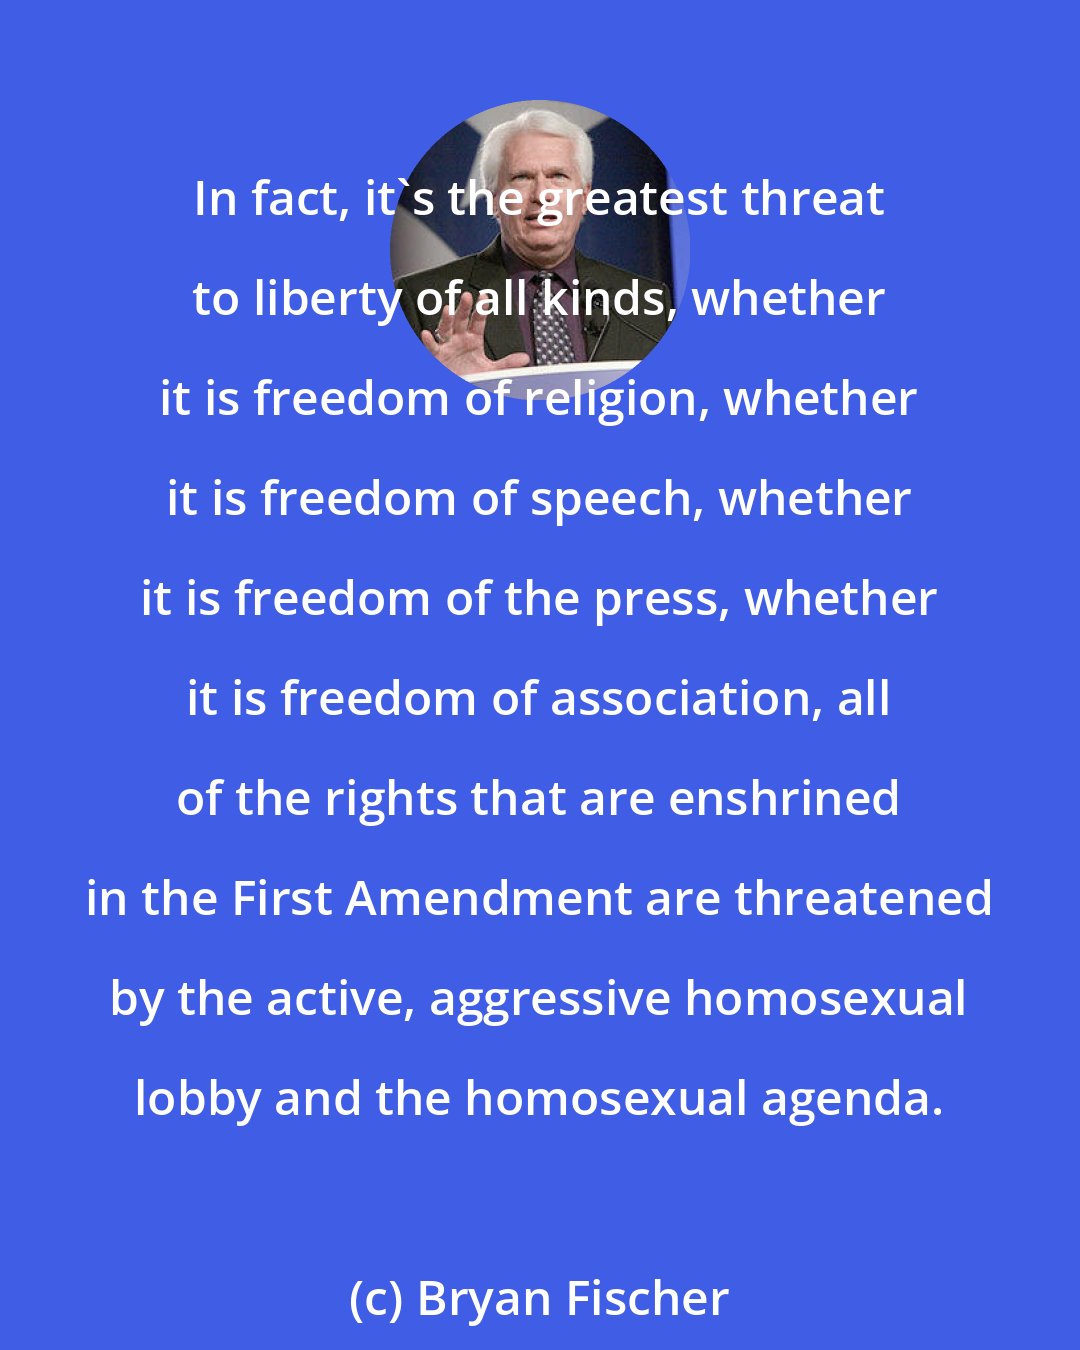 Bryan Fischer: In fact, it's the greatest threat to liberty of all kinds, whether it is freedom of religion, whether it is freedom of speech, whether it is freedom of the press, whether it is freedom of association, all of the rights that are enshrined in the First Amendment are threatened by the active, aggressive homosexual lobby and the homosexual agenda.